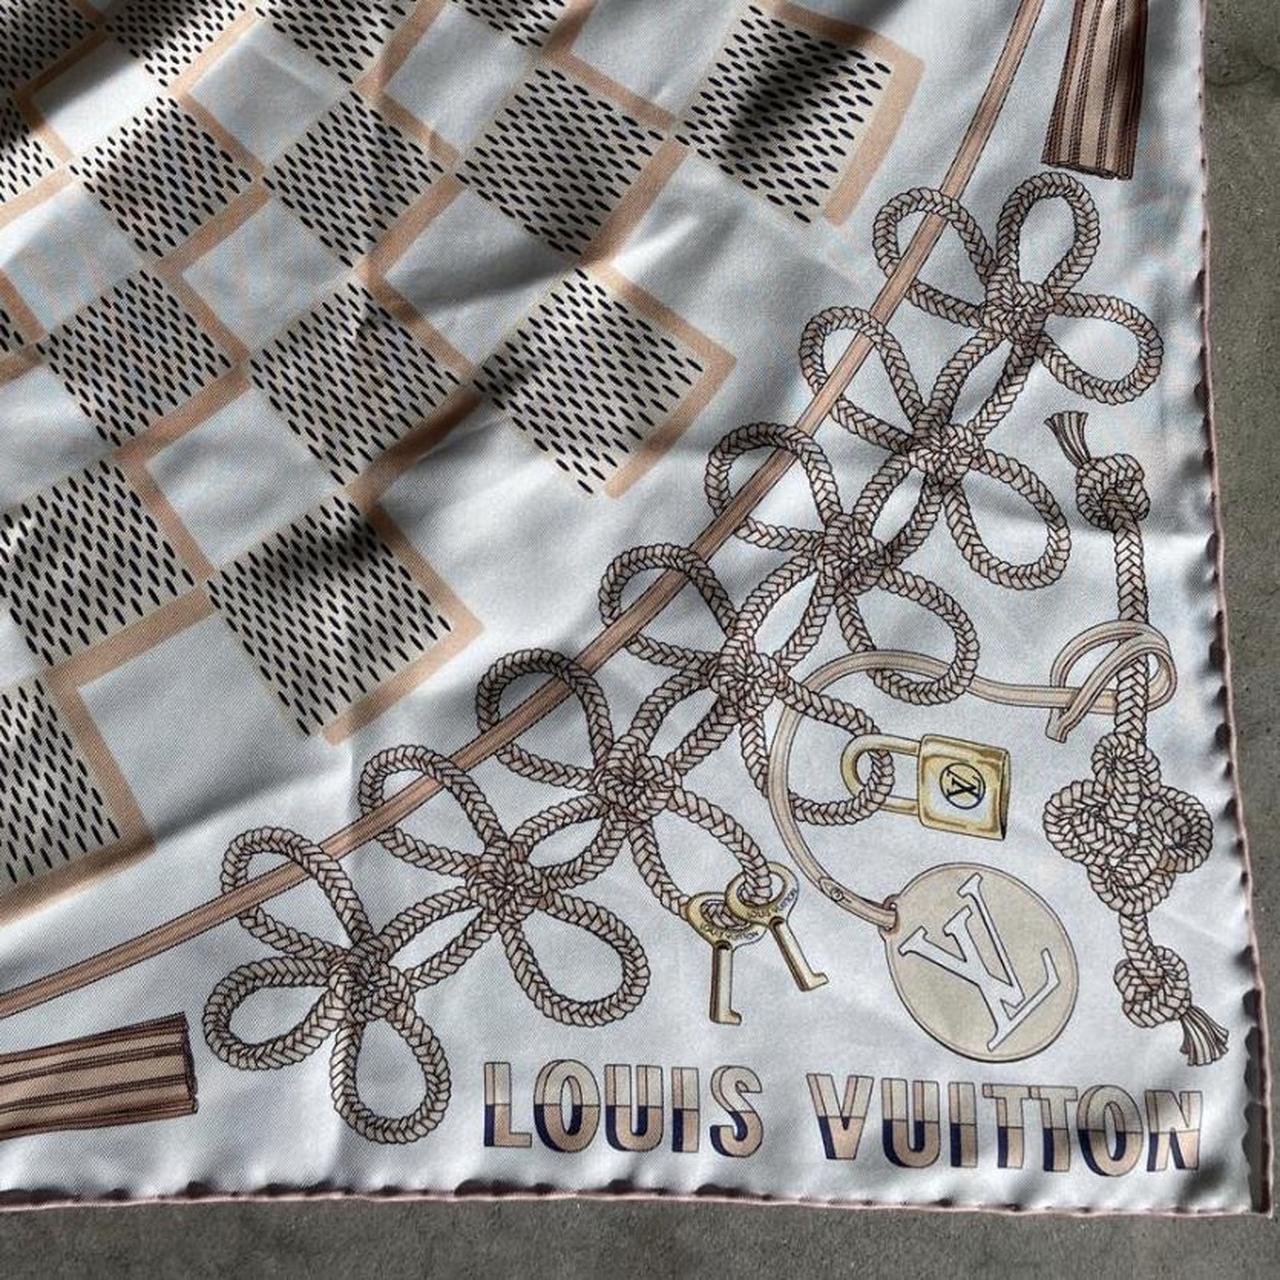 VUITTON, silk square decorated with the Louis Vuitton lo…